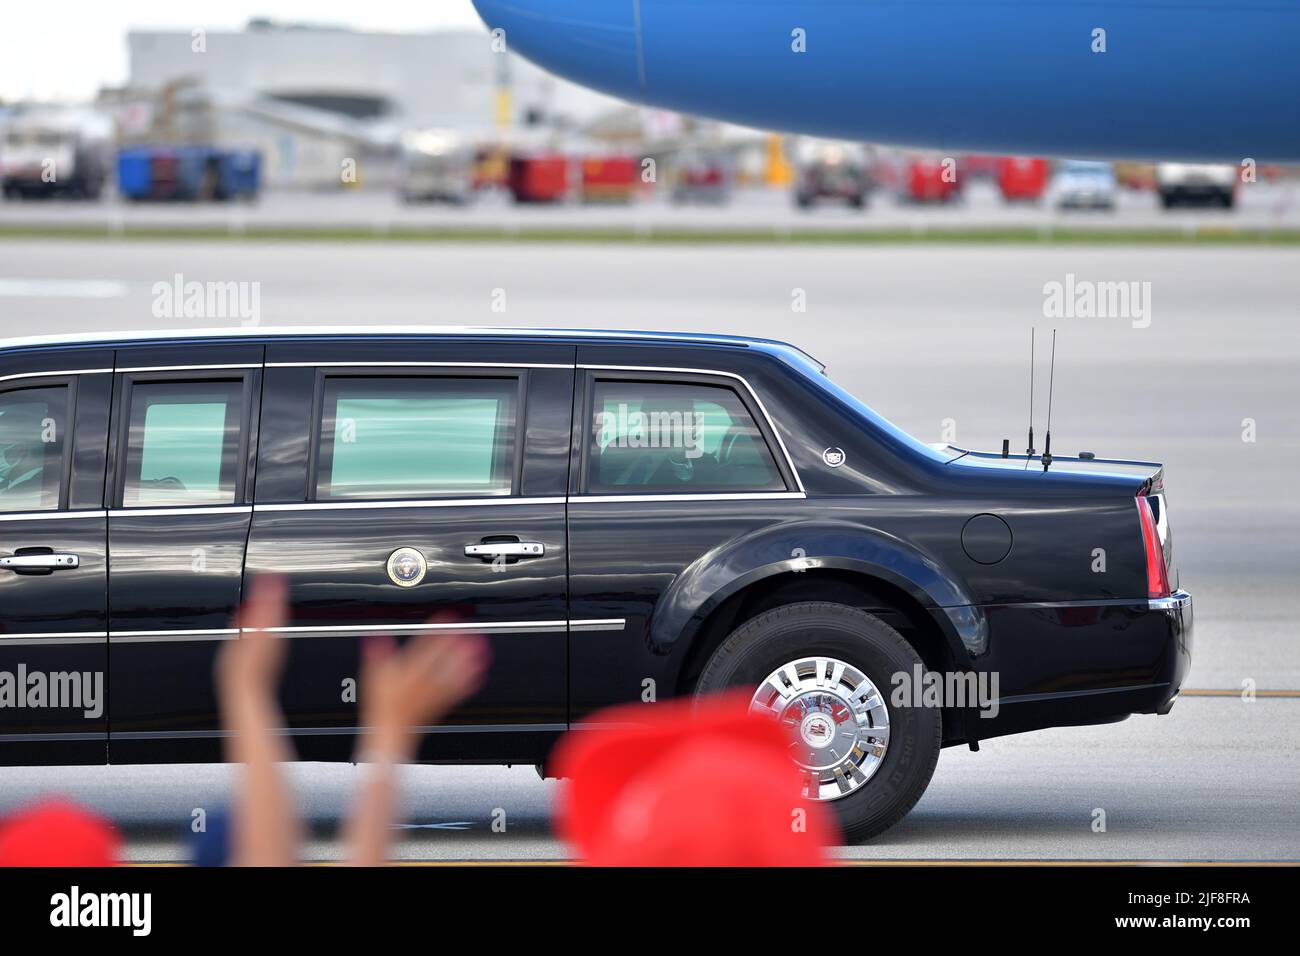 Miami, United States Of America. 15th Oct, 2020. MIAMI, FL - OCTOBER 15: US President Donald Trump arriving at Miami International Airport on October 15, 2020 in Miami, Florida. The President was greeted by Carlos A. Gimnez Mayor of Miami-Dade County and professional mixed martial arts fighter Jorge Masvida. The president is in town to do a town hall tonight prior to the 2020 election which is in 19 days People: President Donald Trump Credit: Storms Media Group/Alamy Live News Stock Photo